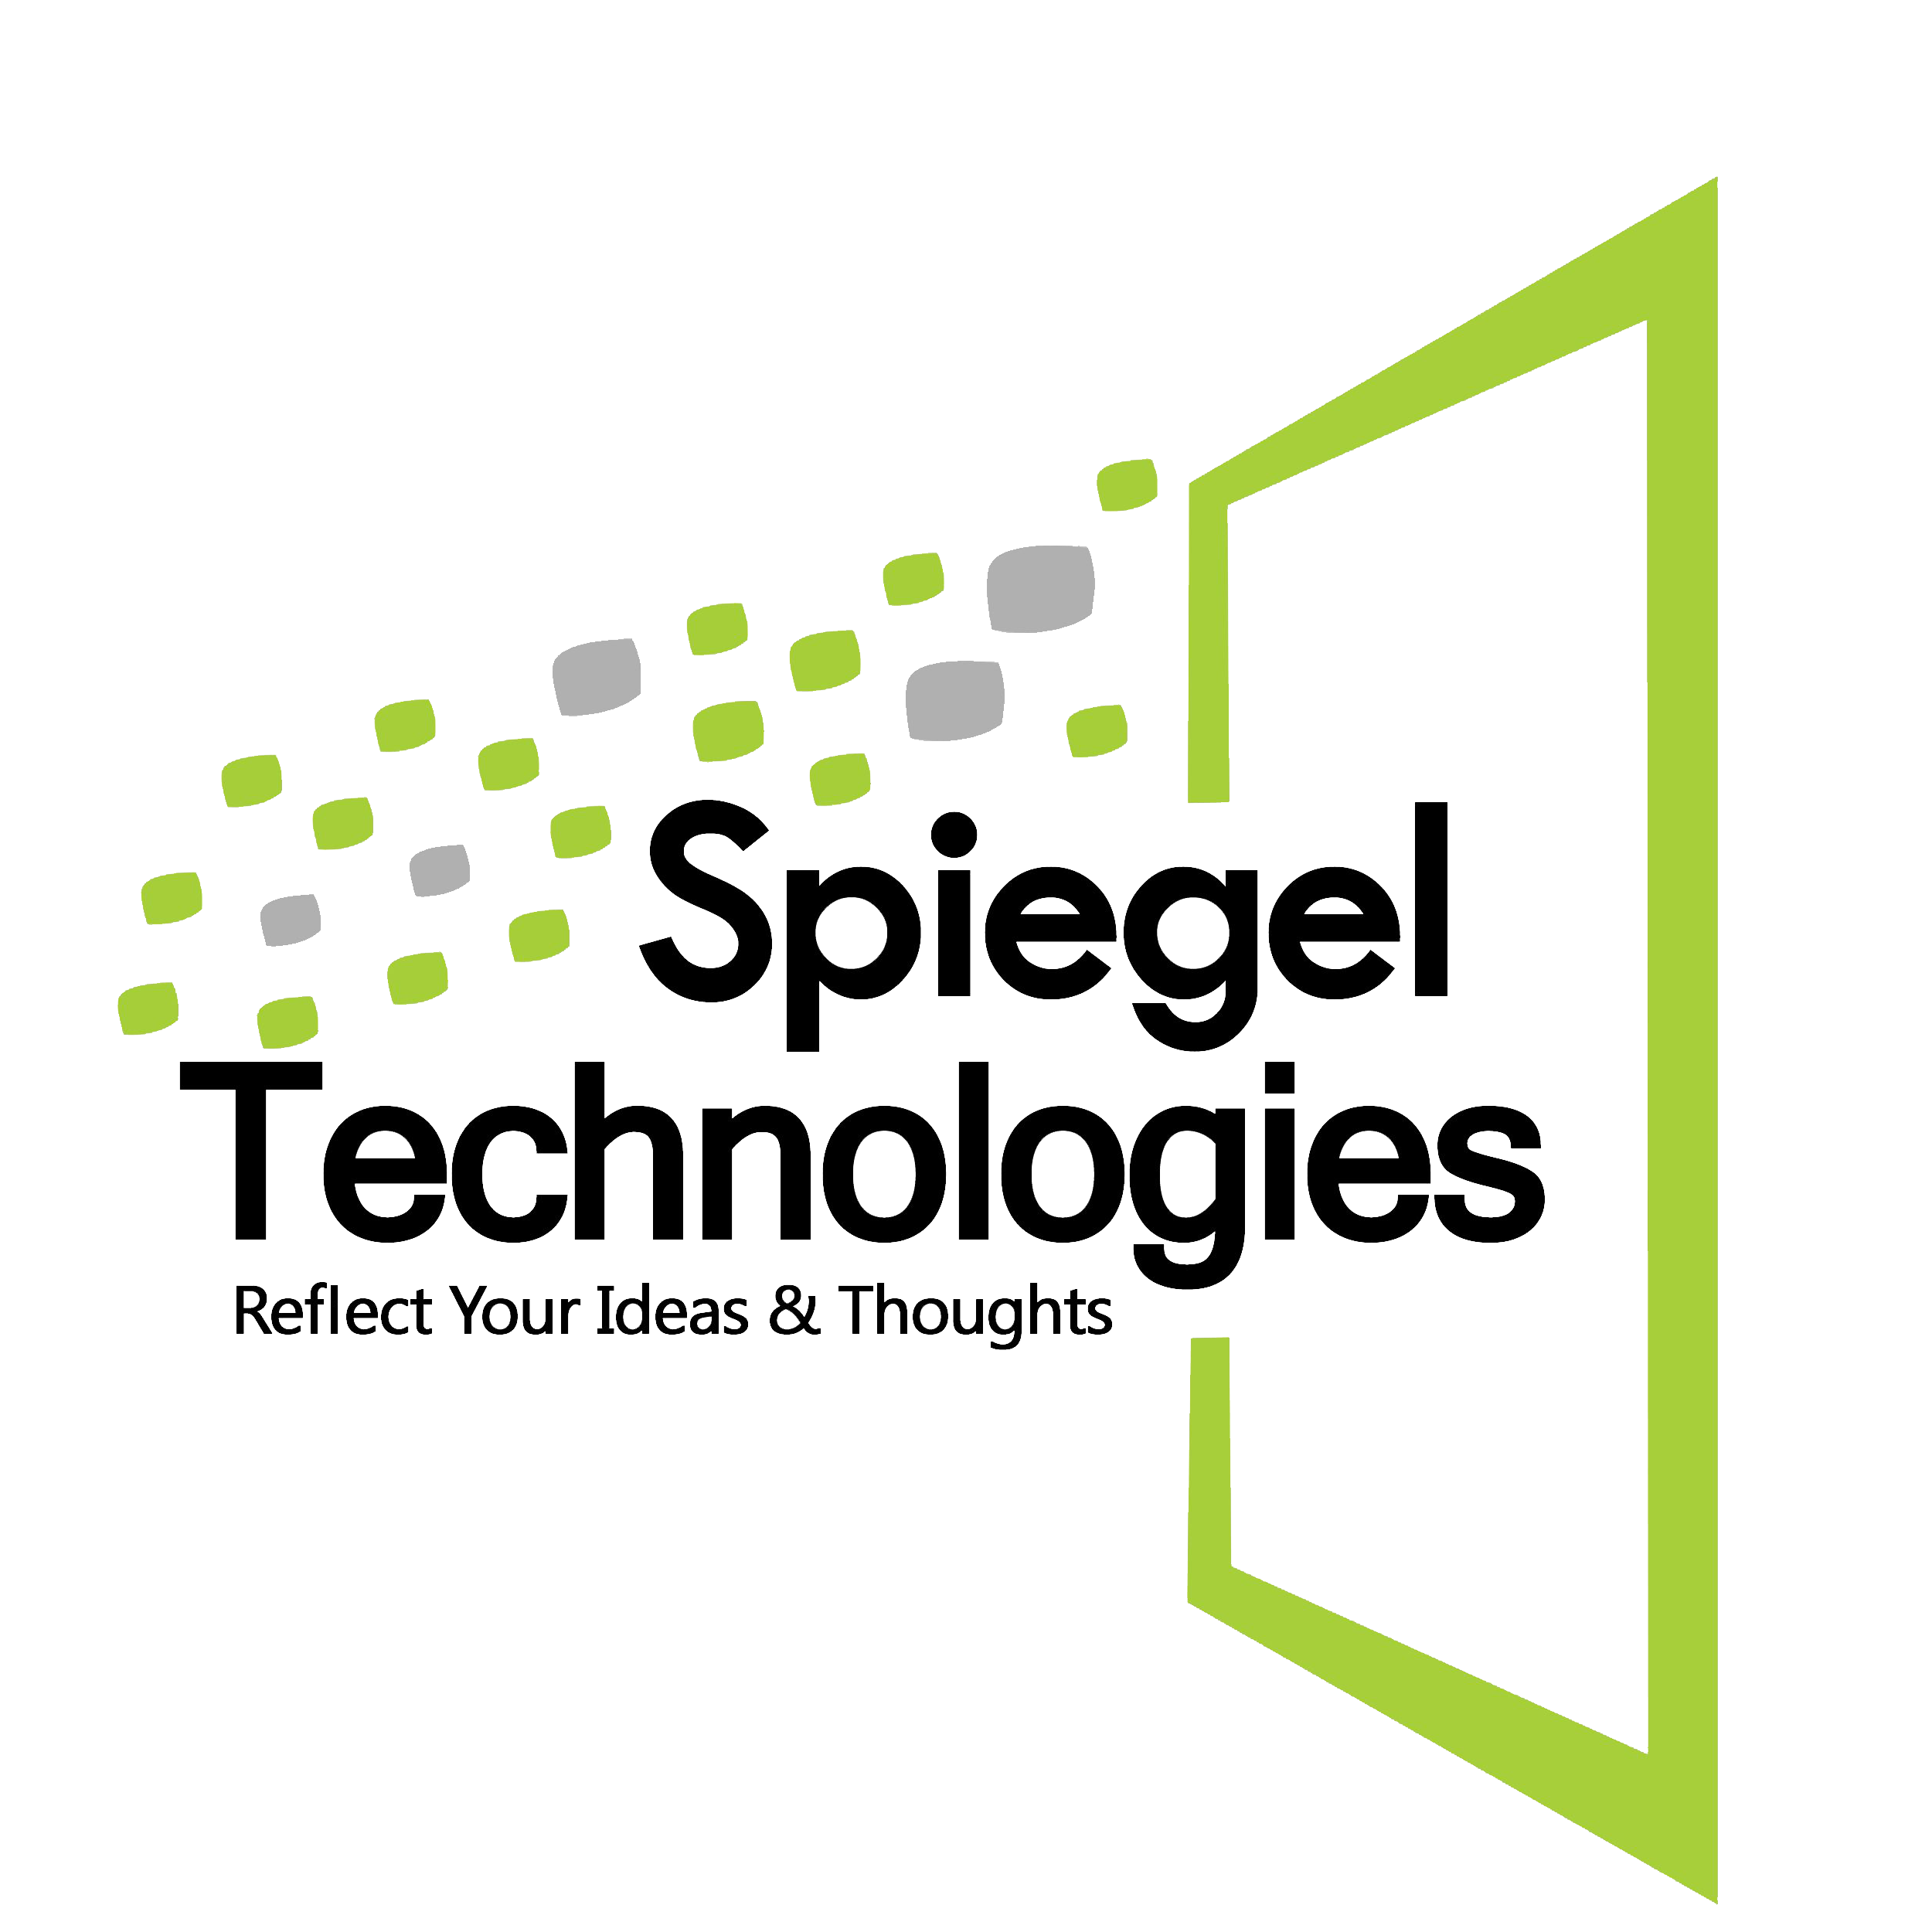 Spiegel Technologies profile on Qualified.One